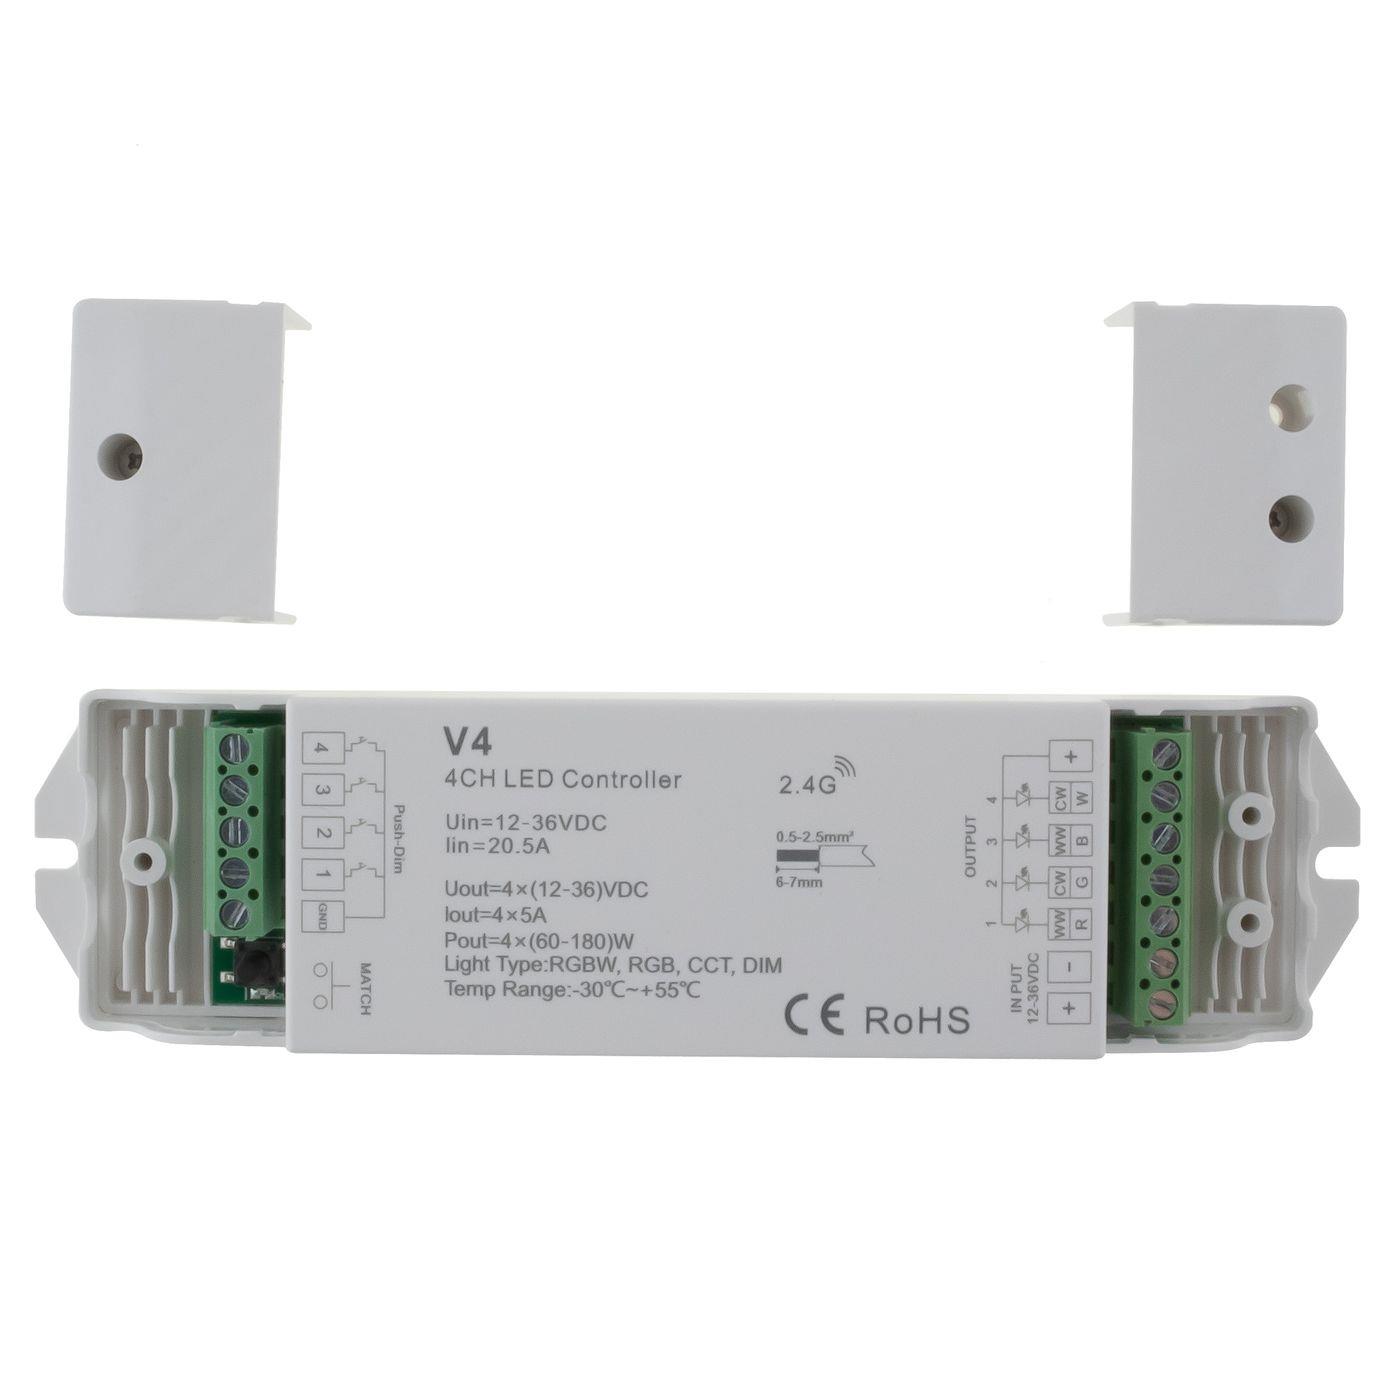 Elegance RGB RGBW LED 4-Zone Receiver 12...36V 720W for colour changing strips 4-Pin + 5-Pin